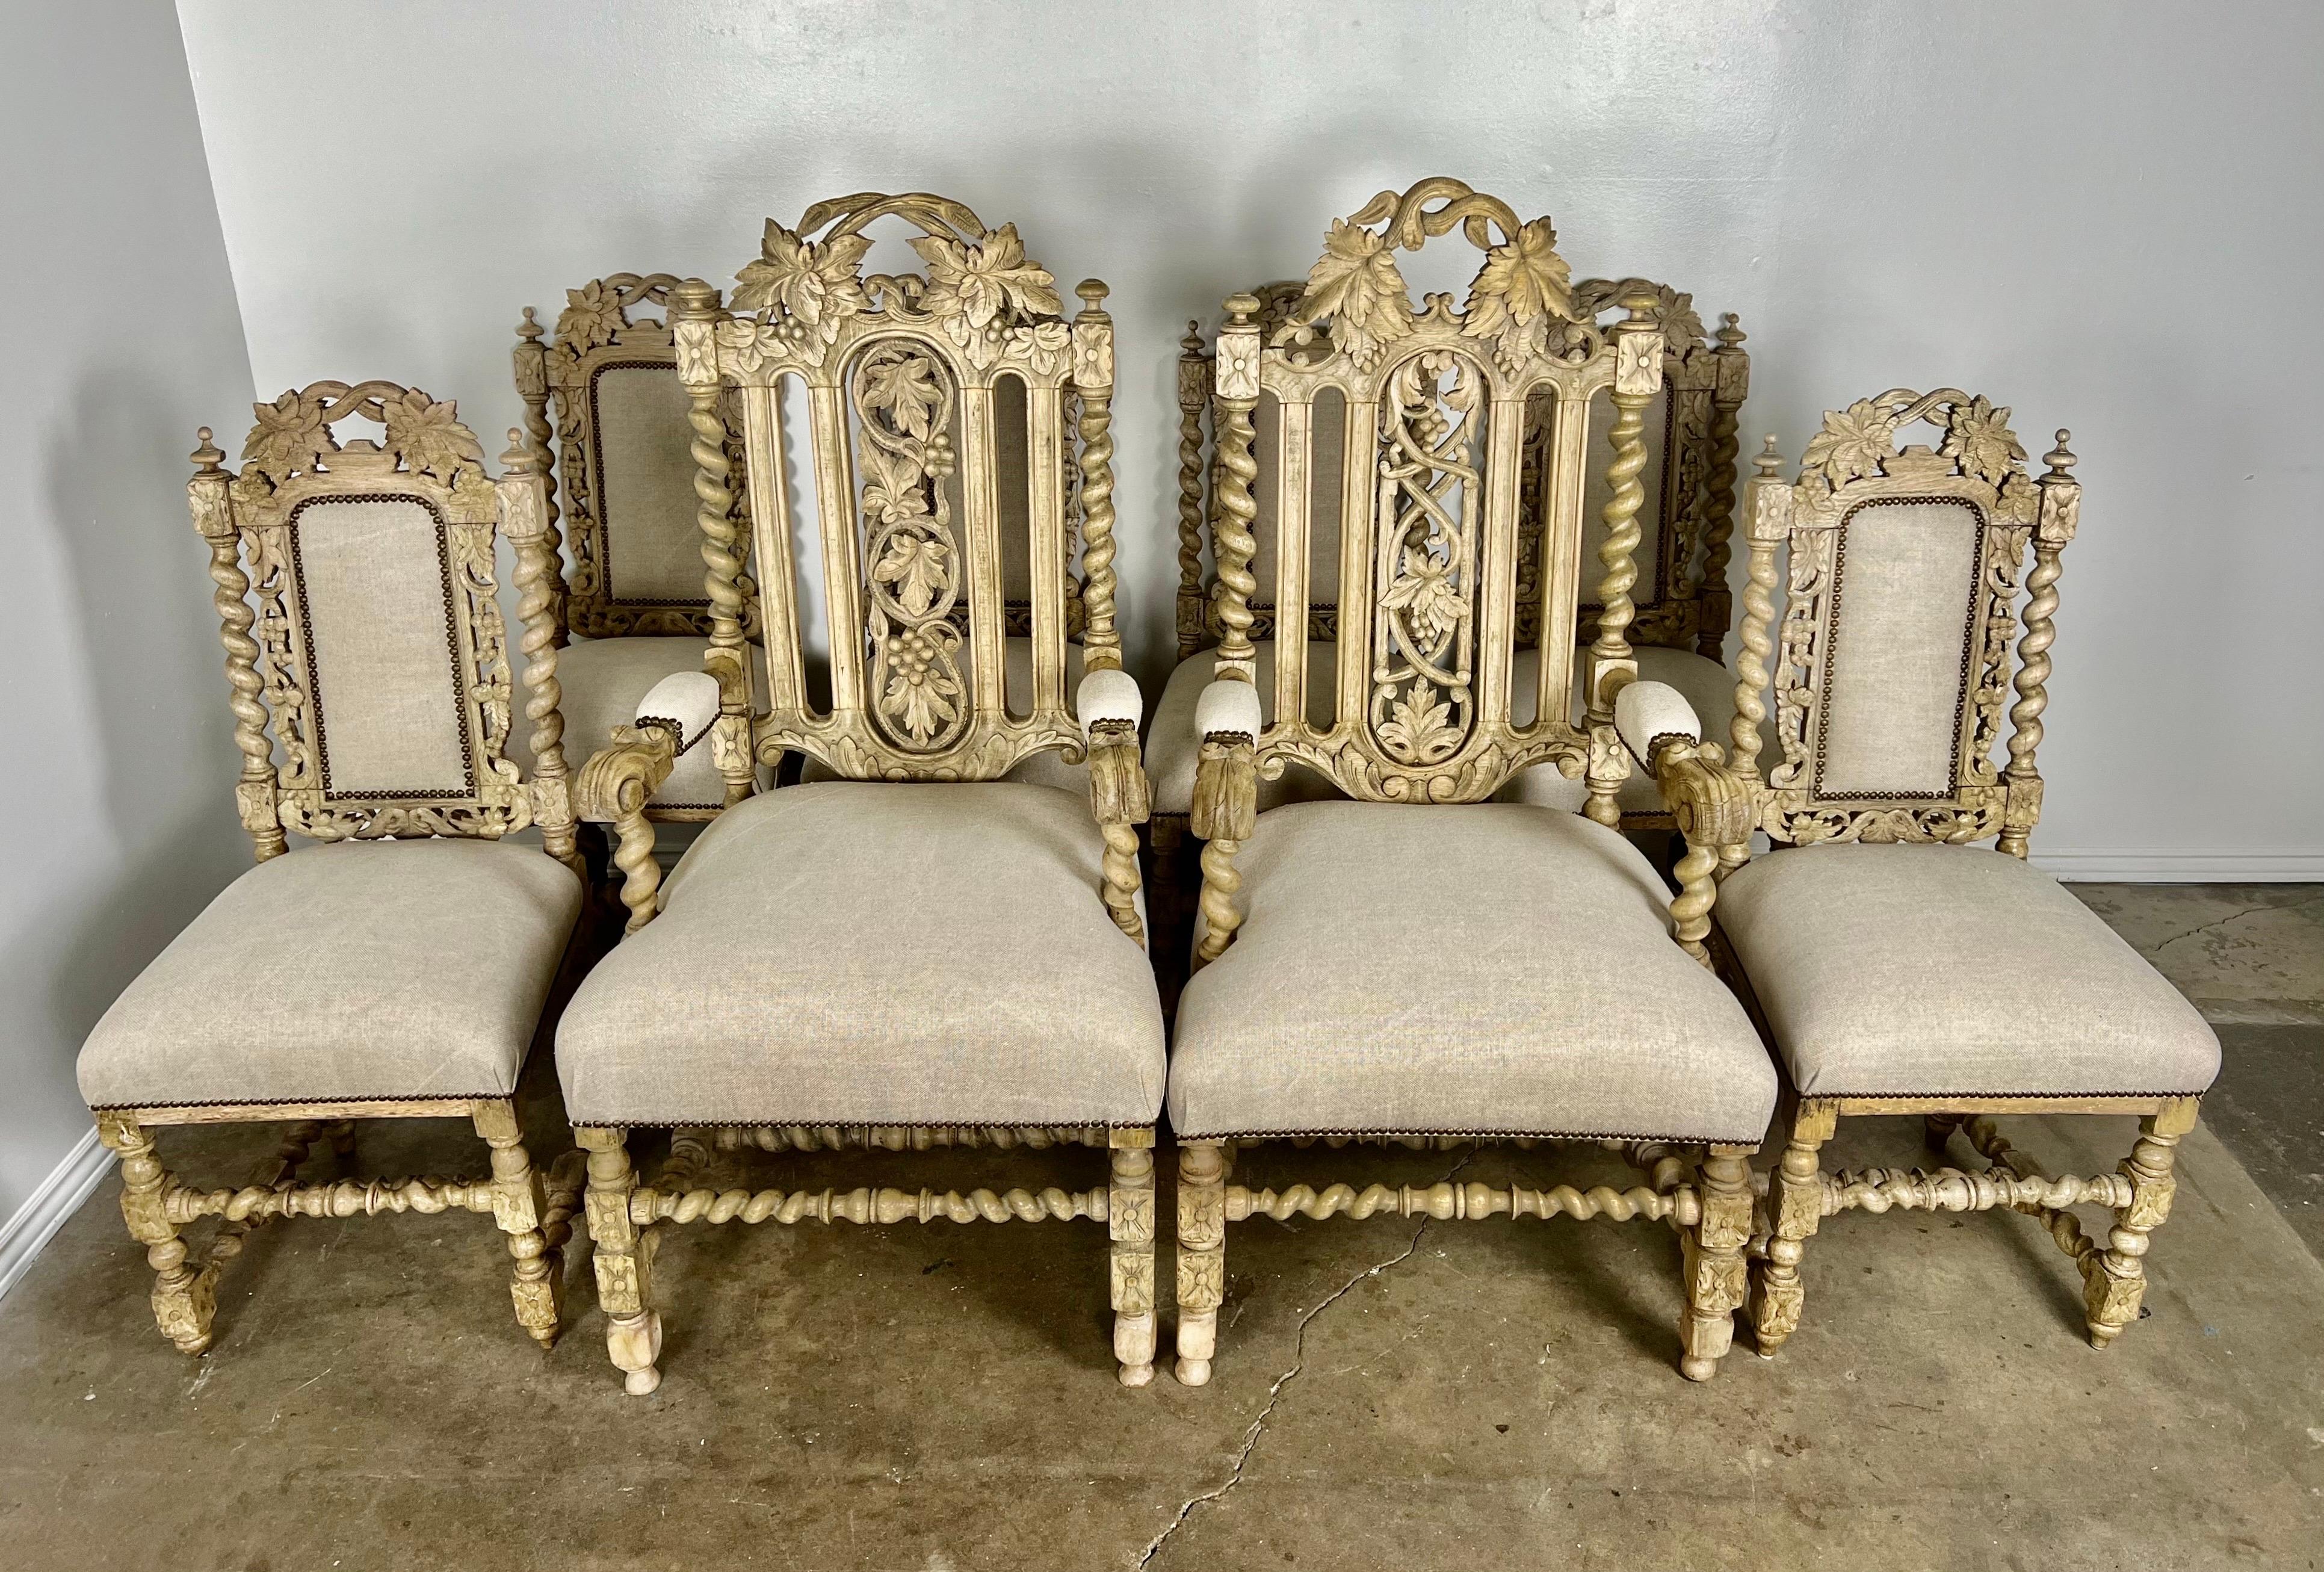 Set of 19th century English Jacobean style dining chairs. The white washed oak chairs are typical of the Jacobean style including rectangular lines combined with ample carving along the wood surfaces as well as the added decorative motifs including